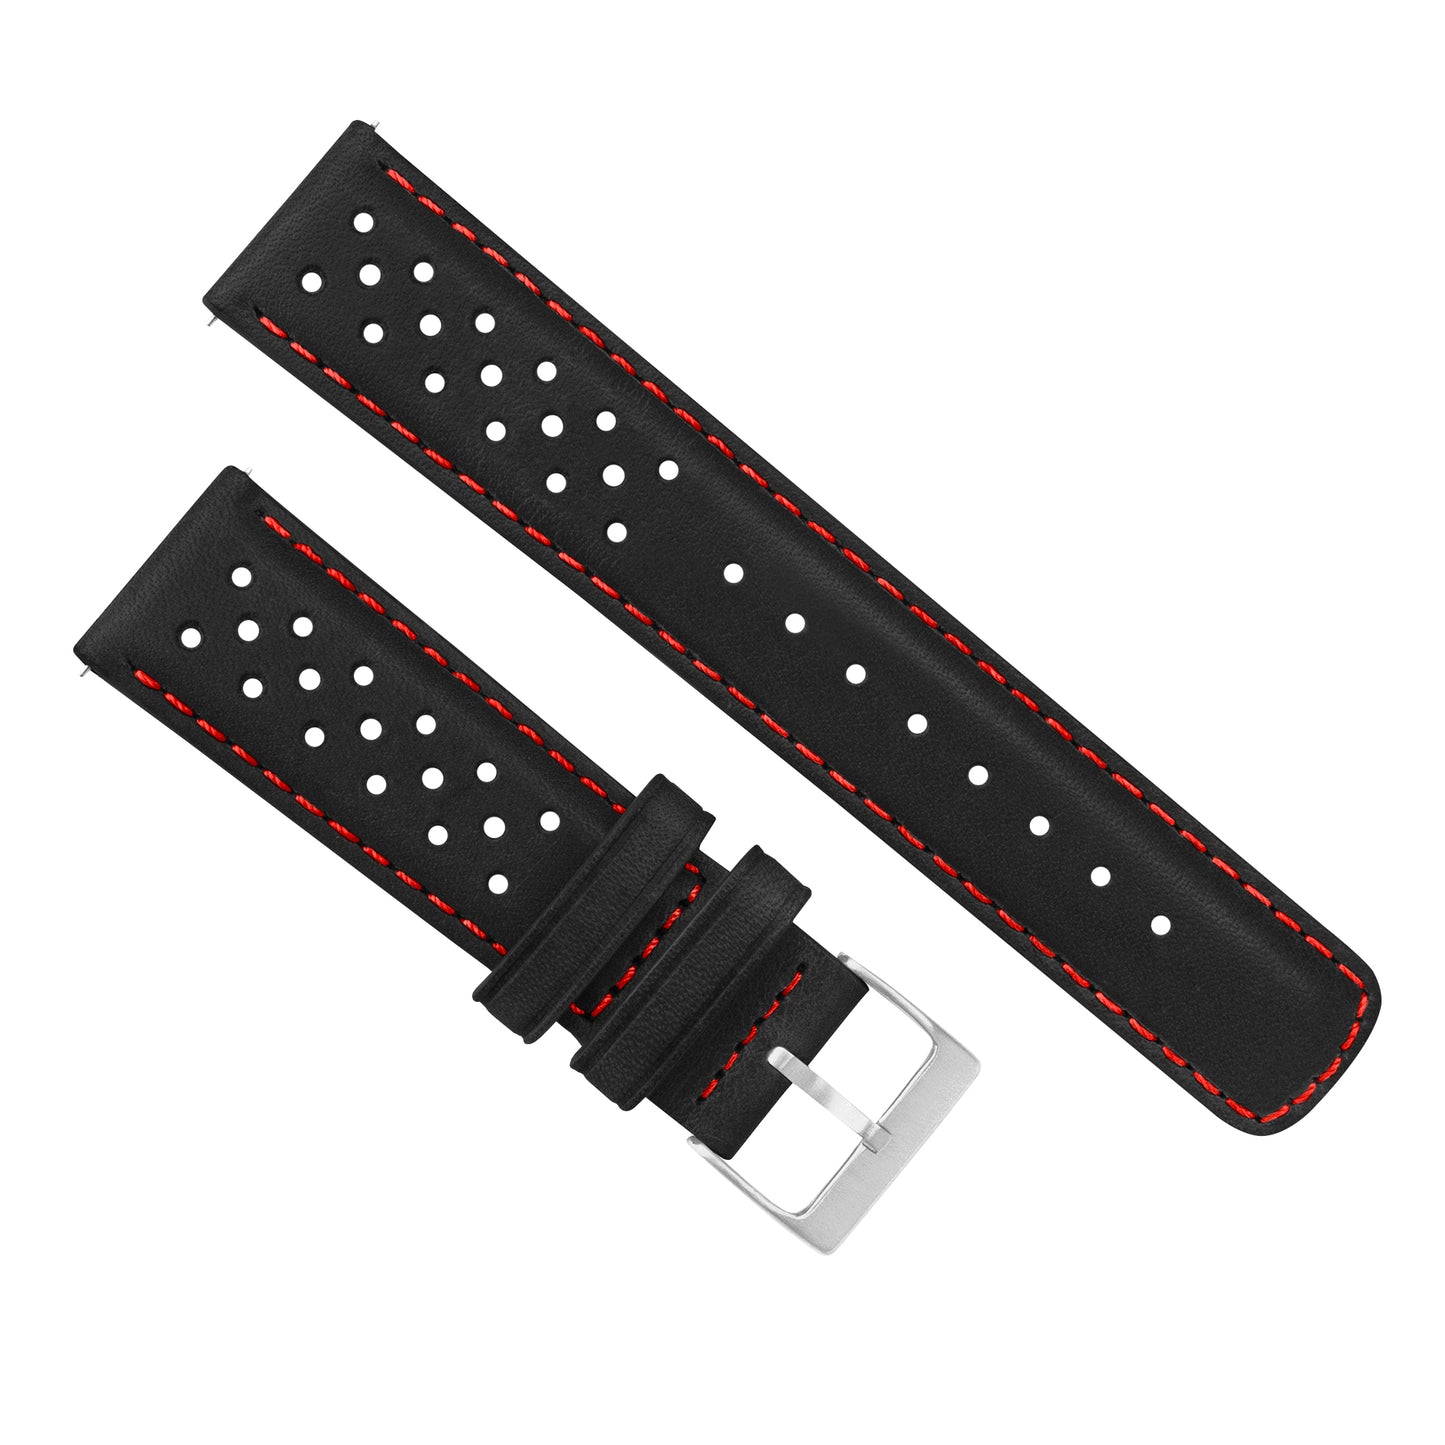 Samsung Galaxy Watch Racing Horween Leather Black Red Stitch Watch Band